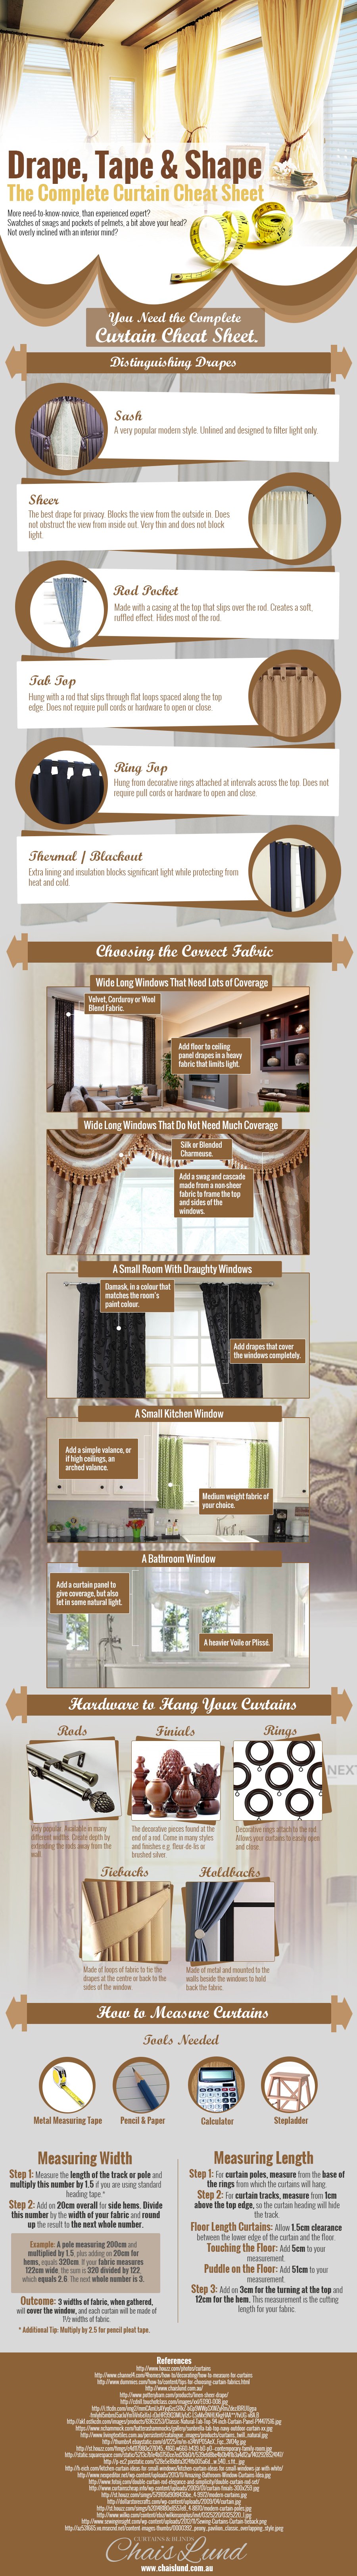 The Complete Curtain Cheat Sheet | Tipsaholic.com #home #decor #design #drapes #curtains #infographic